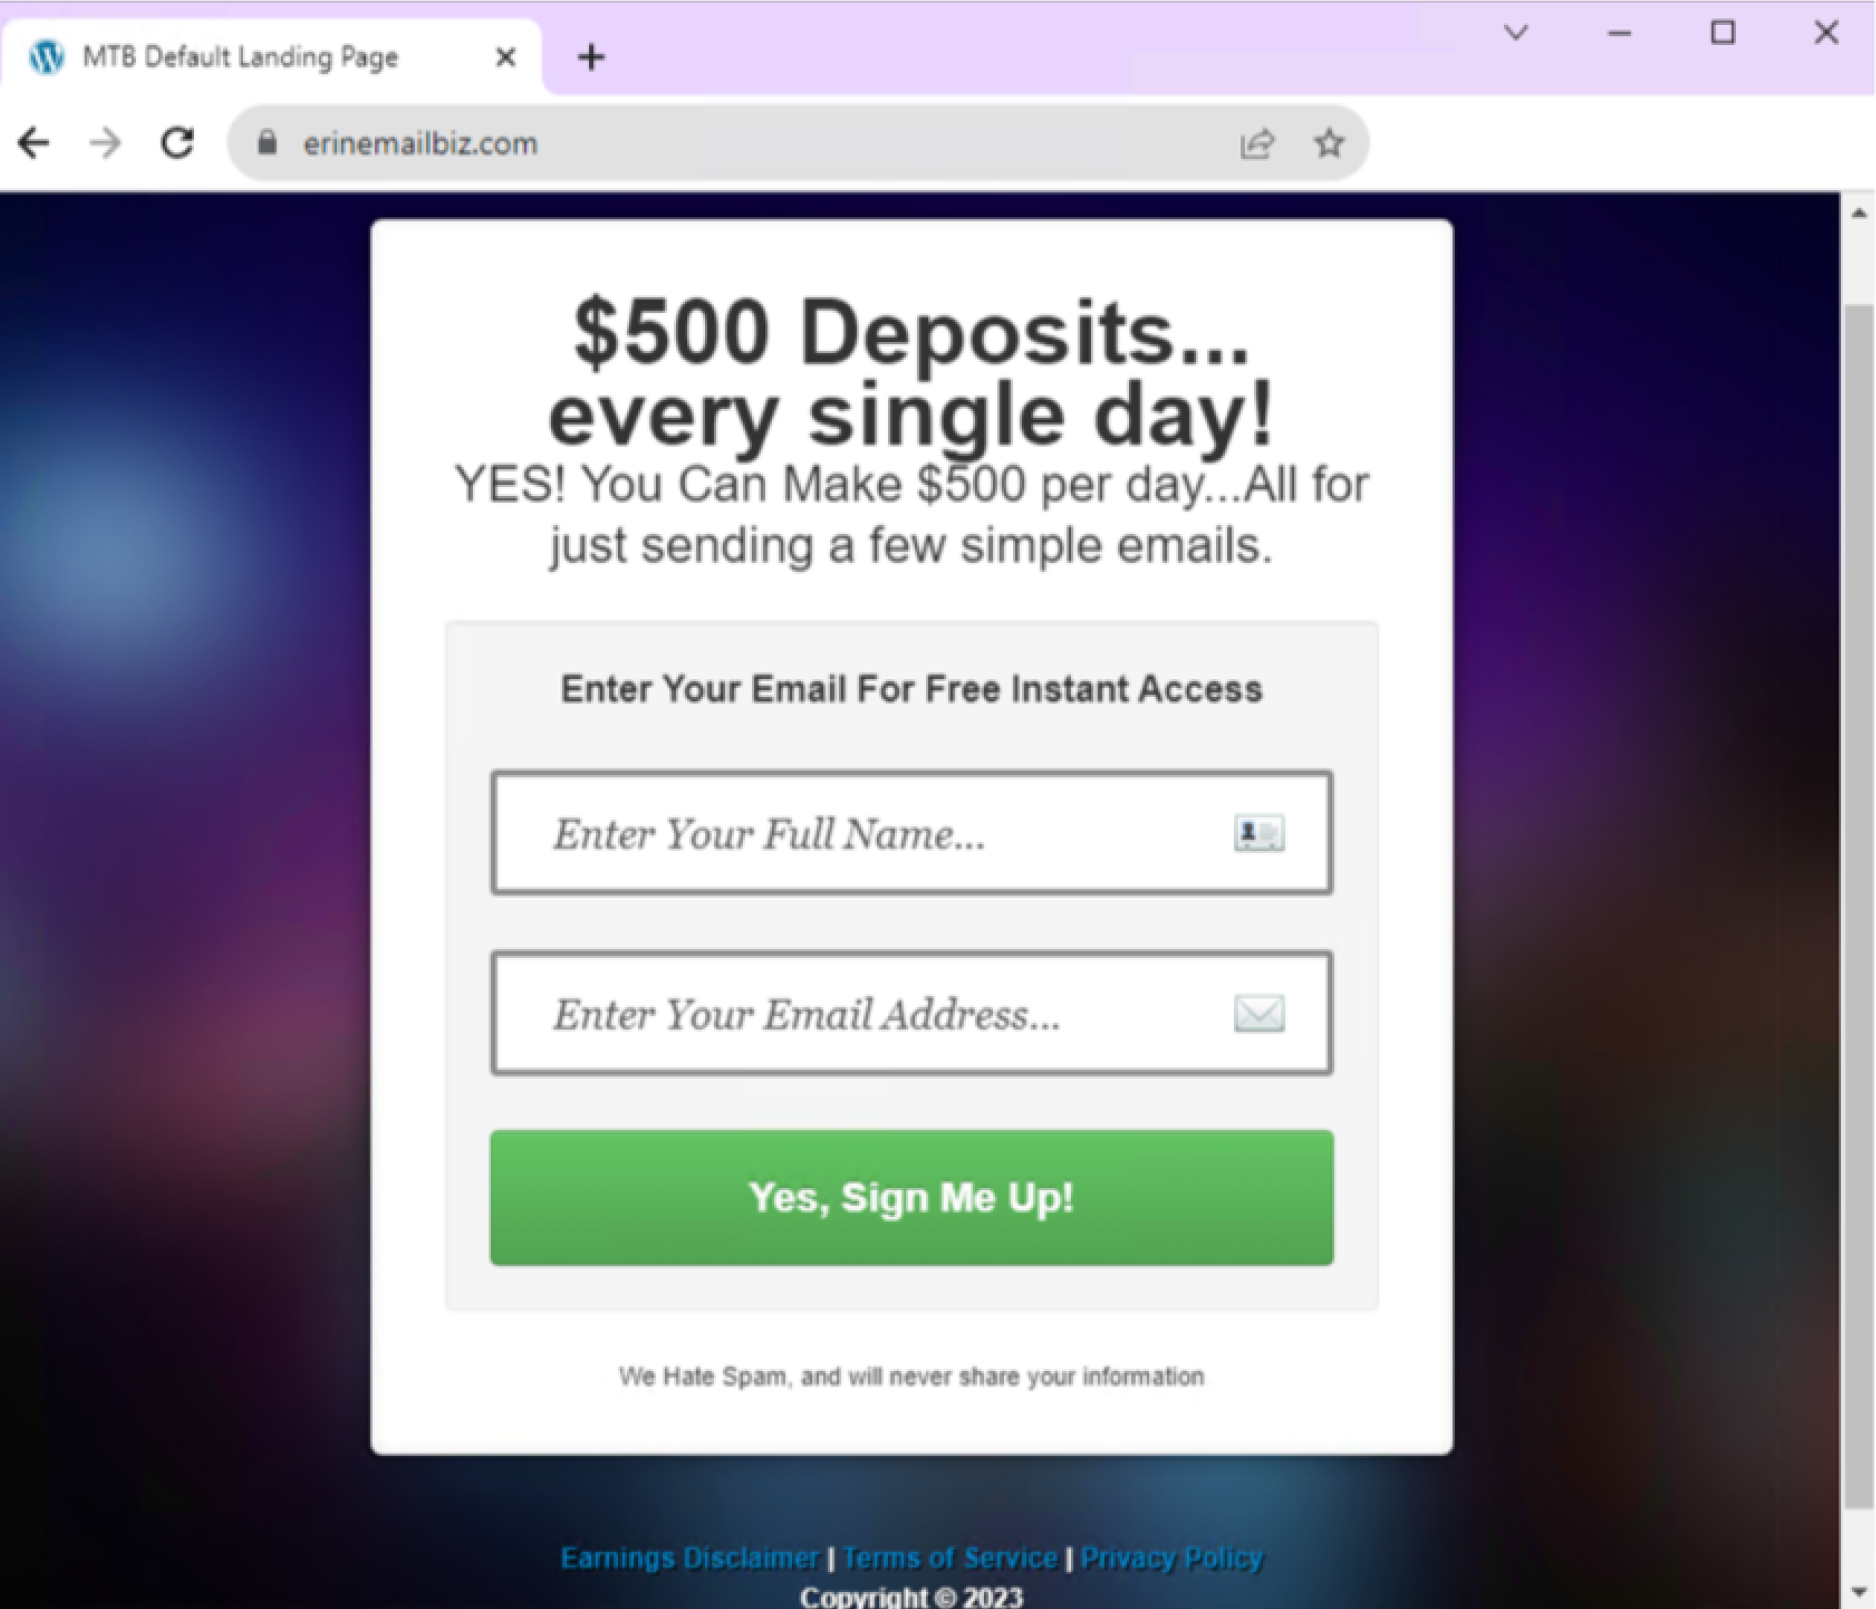 Image 8 is a screenshot of a scam domain. A popup advertising a $500 deposit per day by sending emails. The end-user can enter their full name and email address to sign up.